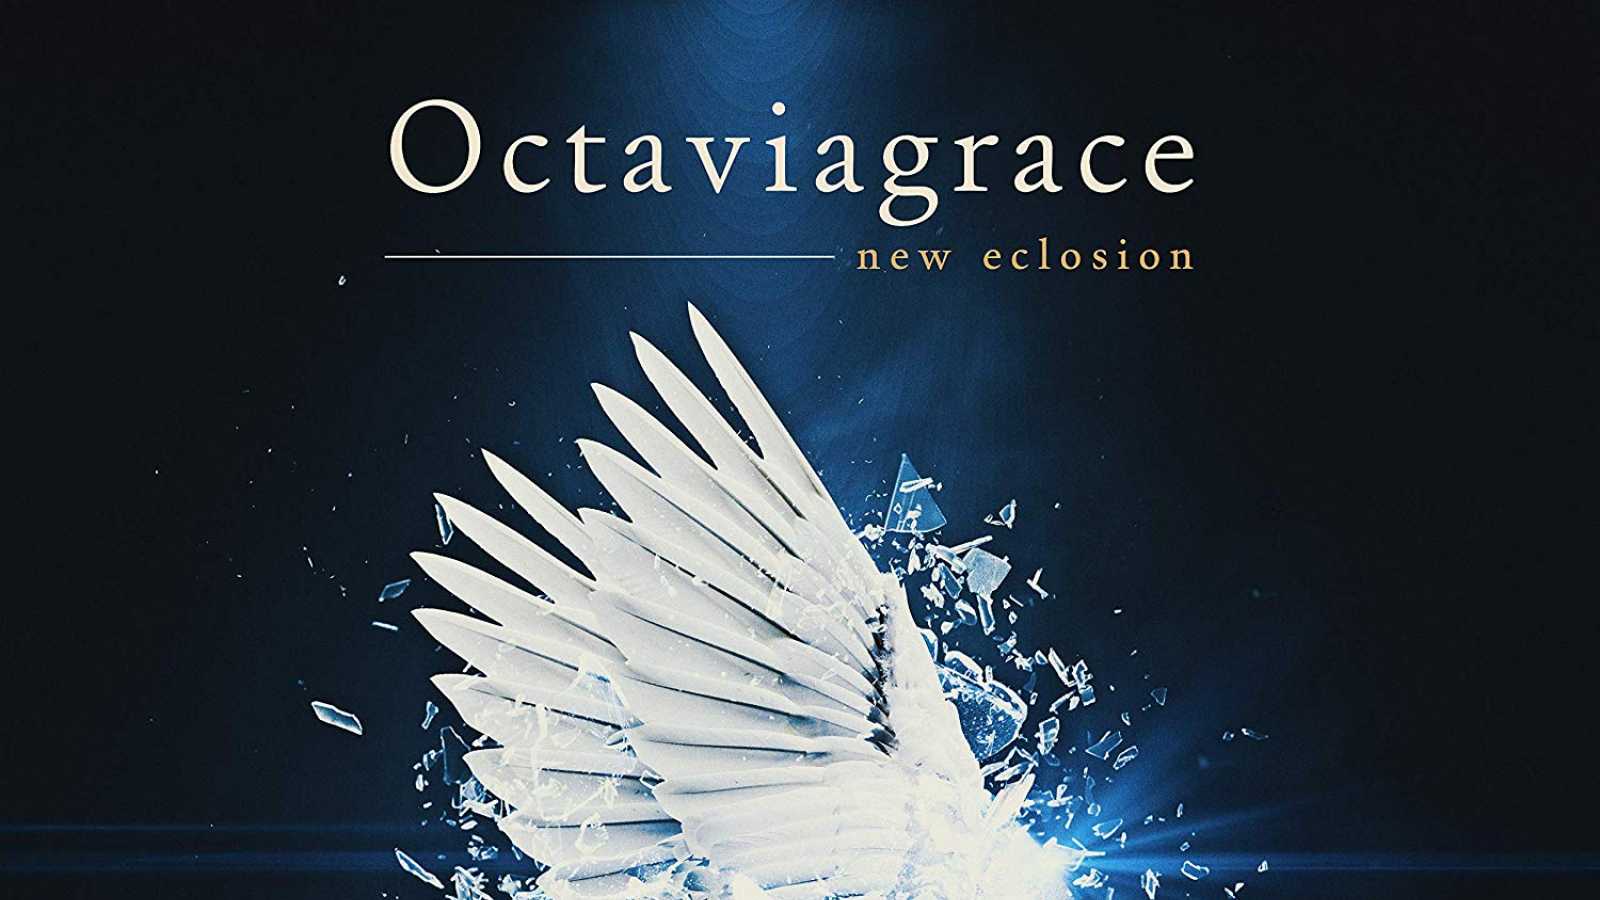 ﻿Octaviagrace - new eclosion © FATE GEAR. All rights reserved.